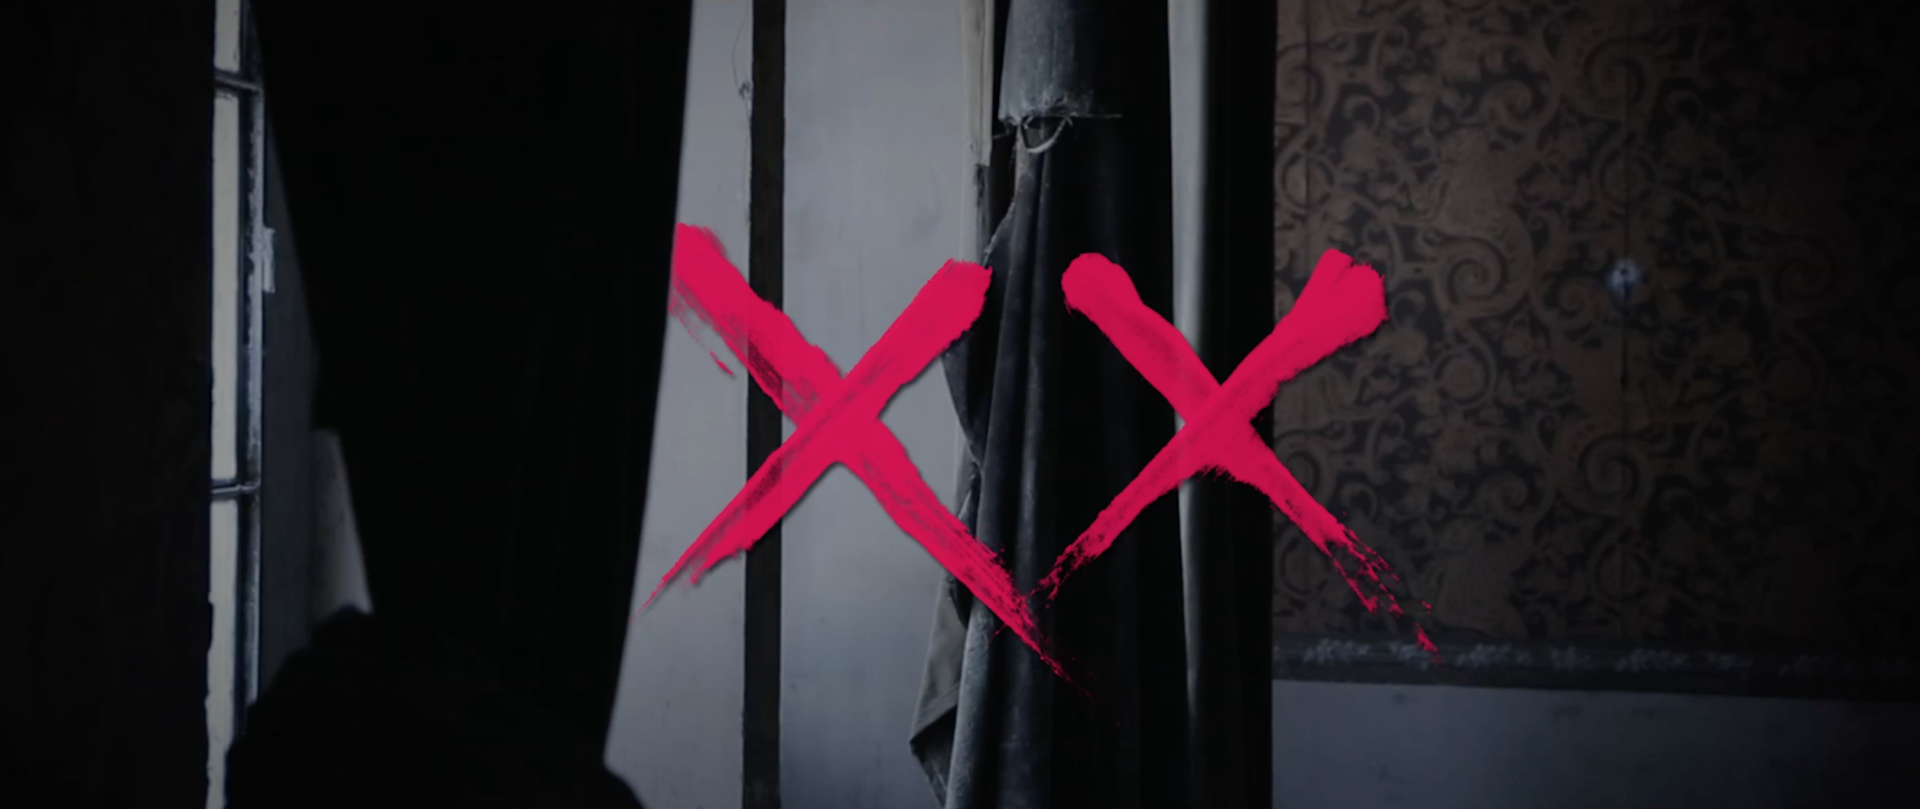 Female-led horror anthology ‘XX’ gets intensely scary first trailer